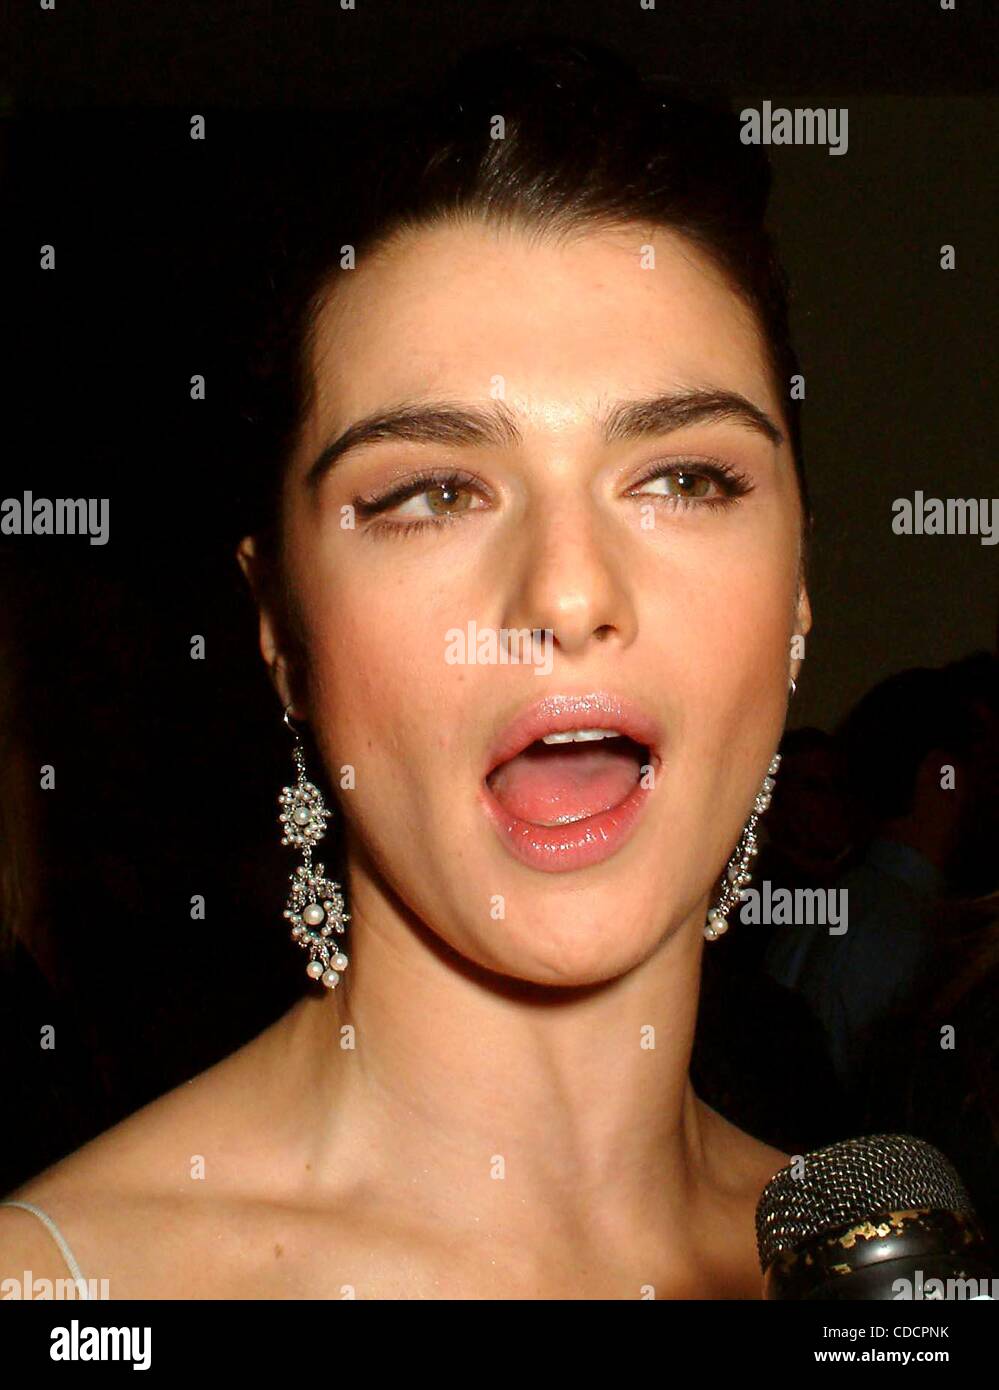 RACHEL WEISZ.K30505ML.PREMIERE OF THE ''SHAPE OF THINGS'' AT THE TRIBECA FILM FESTIVAL, AT PACE UNIVERSITY SCHIMMEL CENTER FOR THE ARTS IN NEW YORK New York.5/7/2003.  /    2003(Credit Image: Â© Mitchell Levy/Globe Photos/ZUMAPRESS.com) Stock Photo